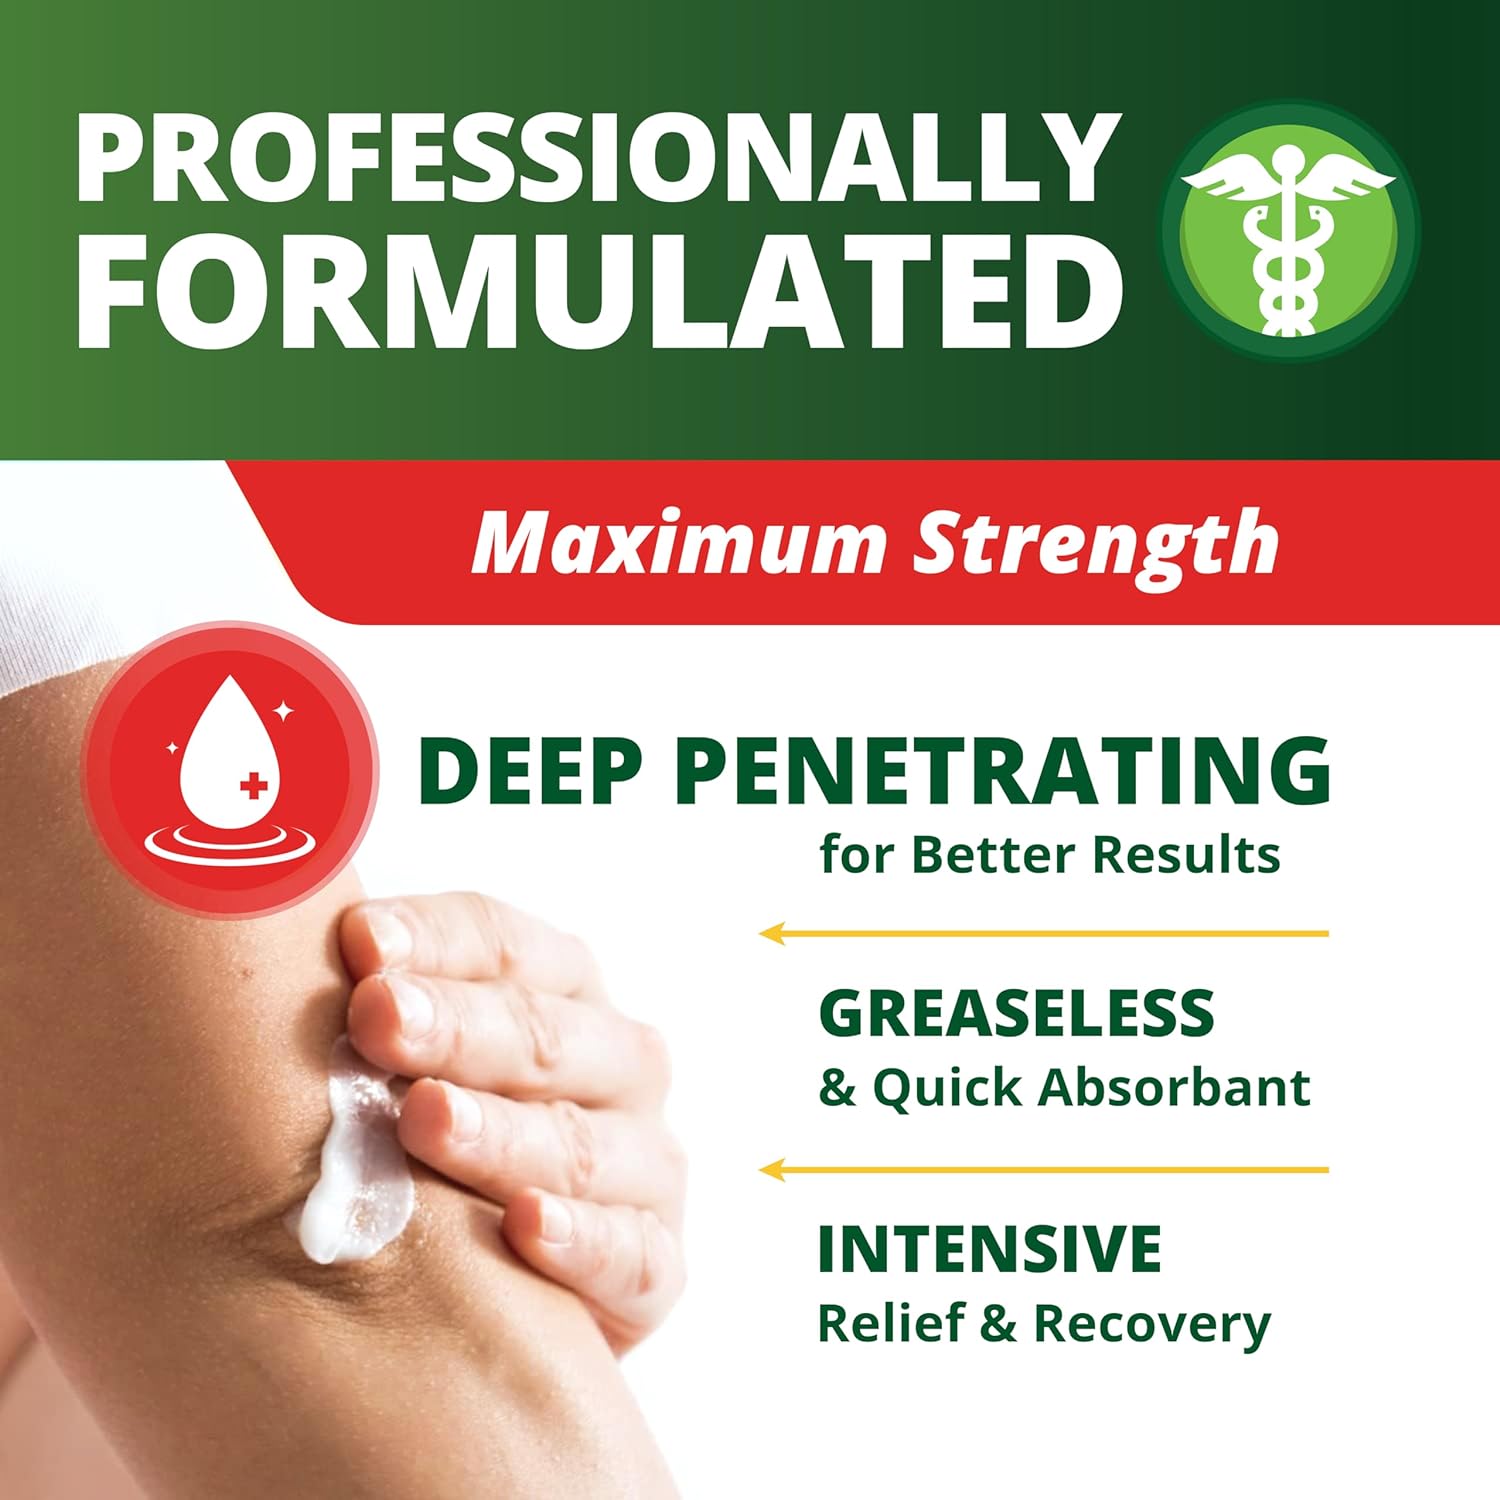 OWELL NATURALS Arthritis Pain Relief Cream - 14oz - Maximum Strength All Natural Discomfort Reliever for Joint, Muscle, Knee, Back, Neuropathy - 11 Powerful Ingredients : Health & Household